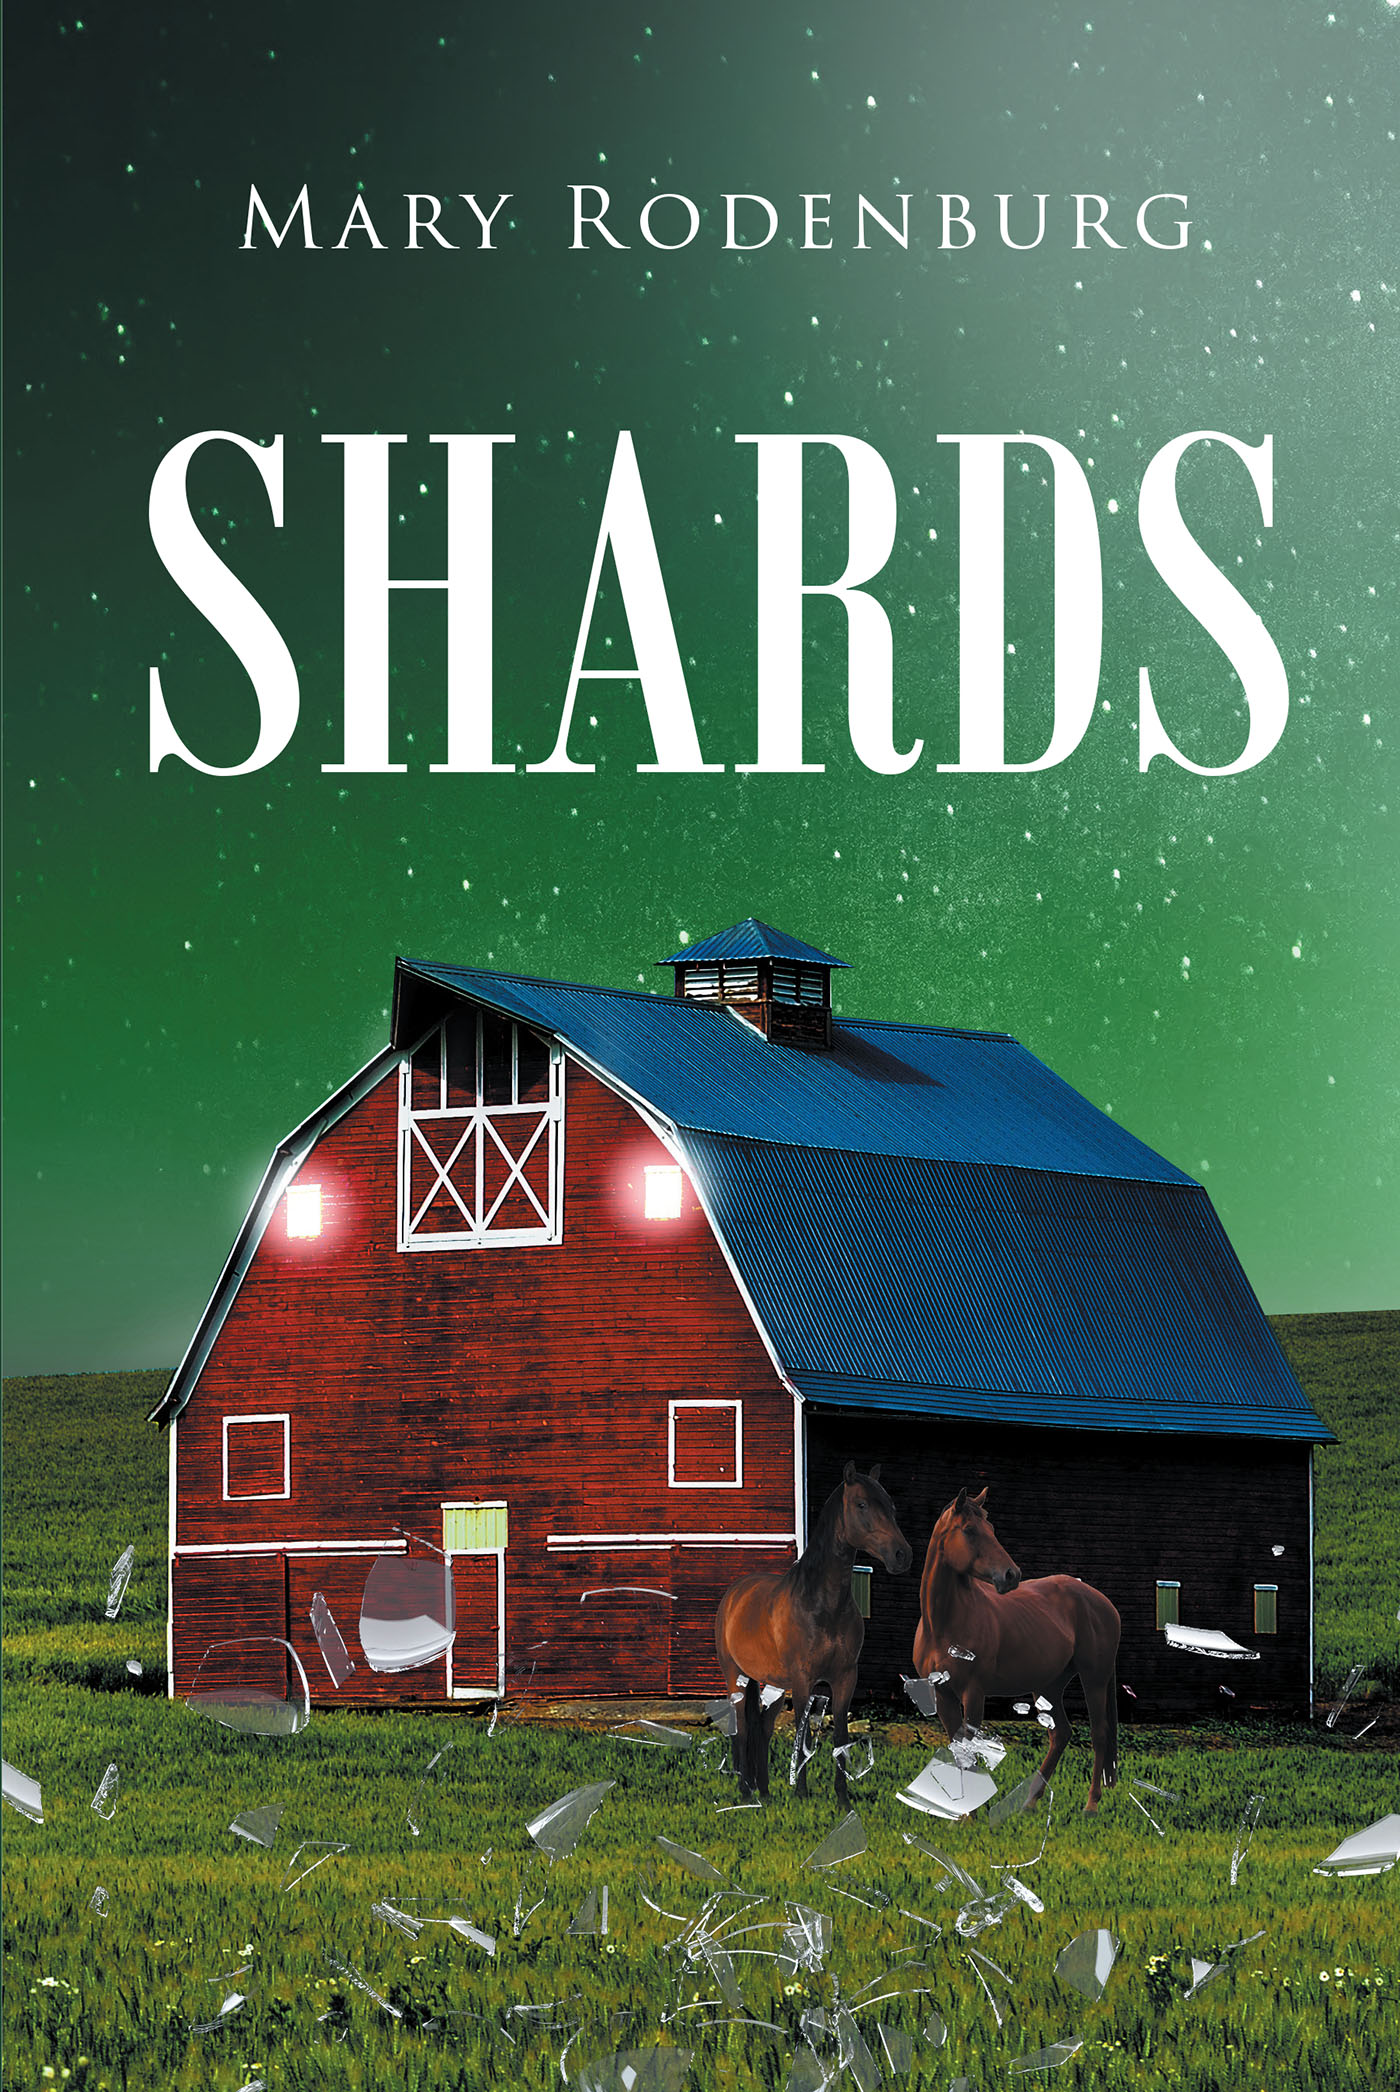 Author Mary Rodenburg’s New Book, "Shards," is a Poignant Tale of One Family's Journey Across Three Generations as They Endure the Varying Peaks and Valleys of Life